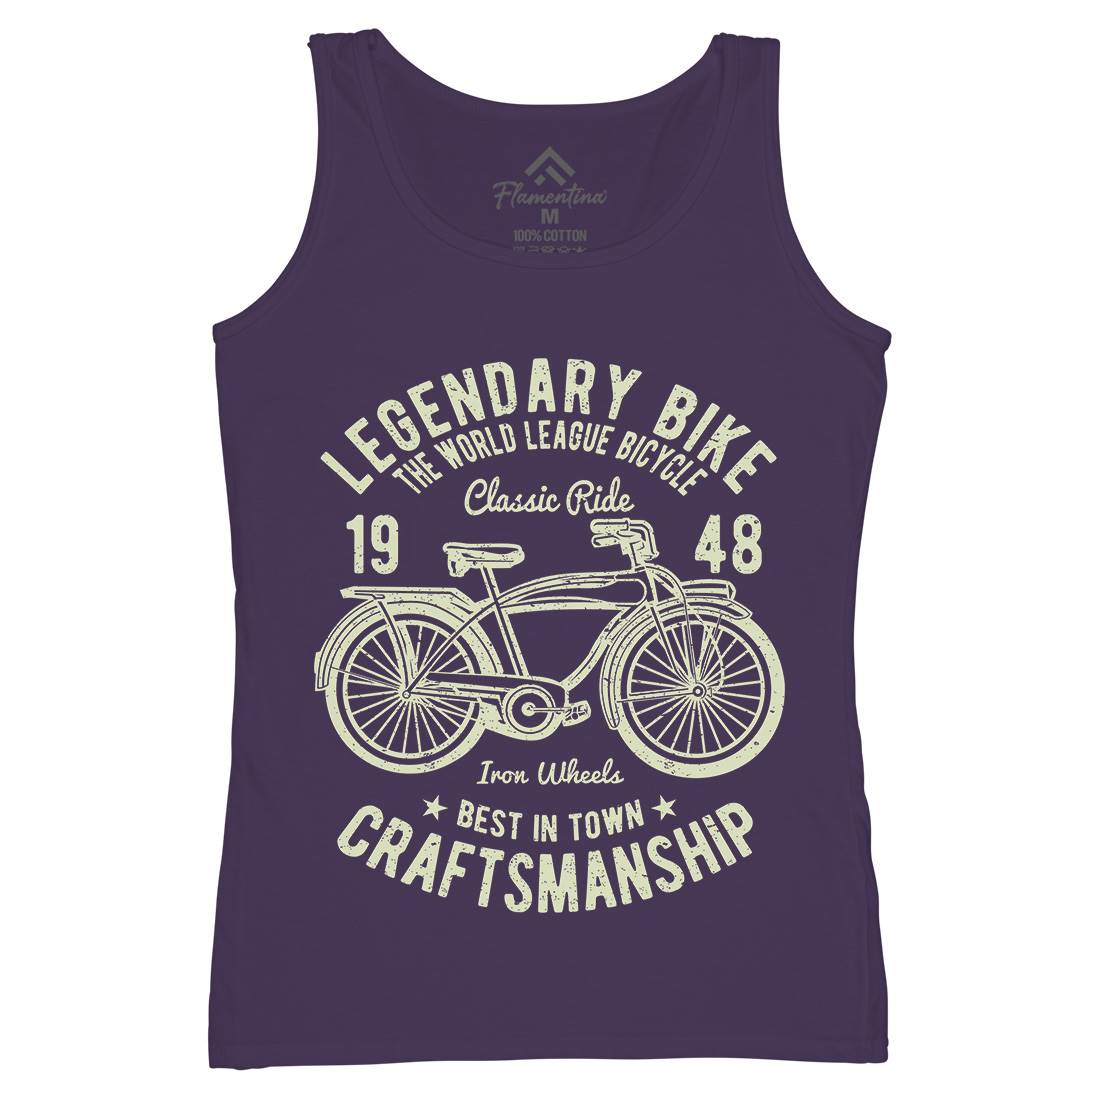 Classic Bicycle Womens Organic Tank Top Vest Bikes A035